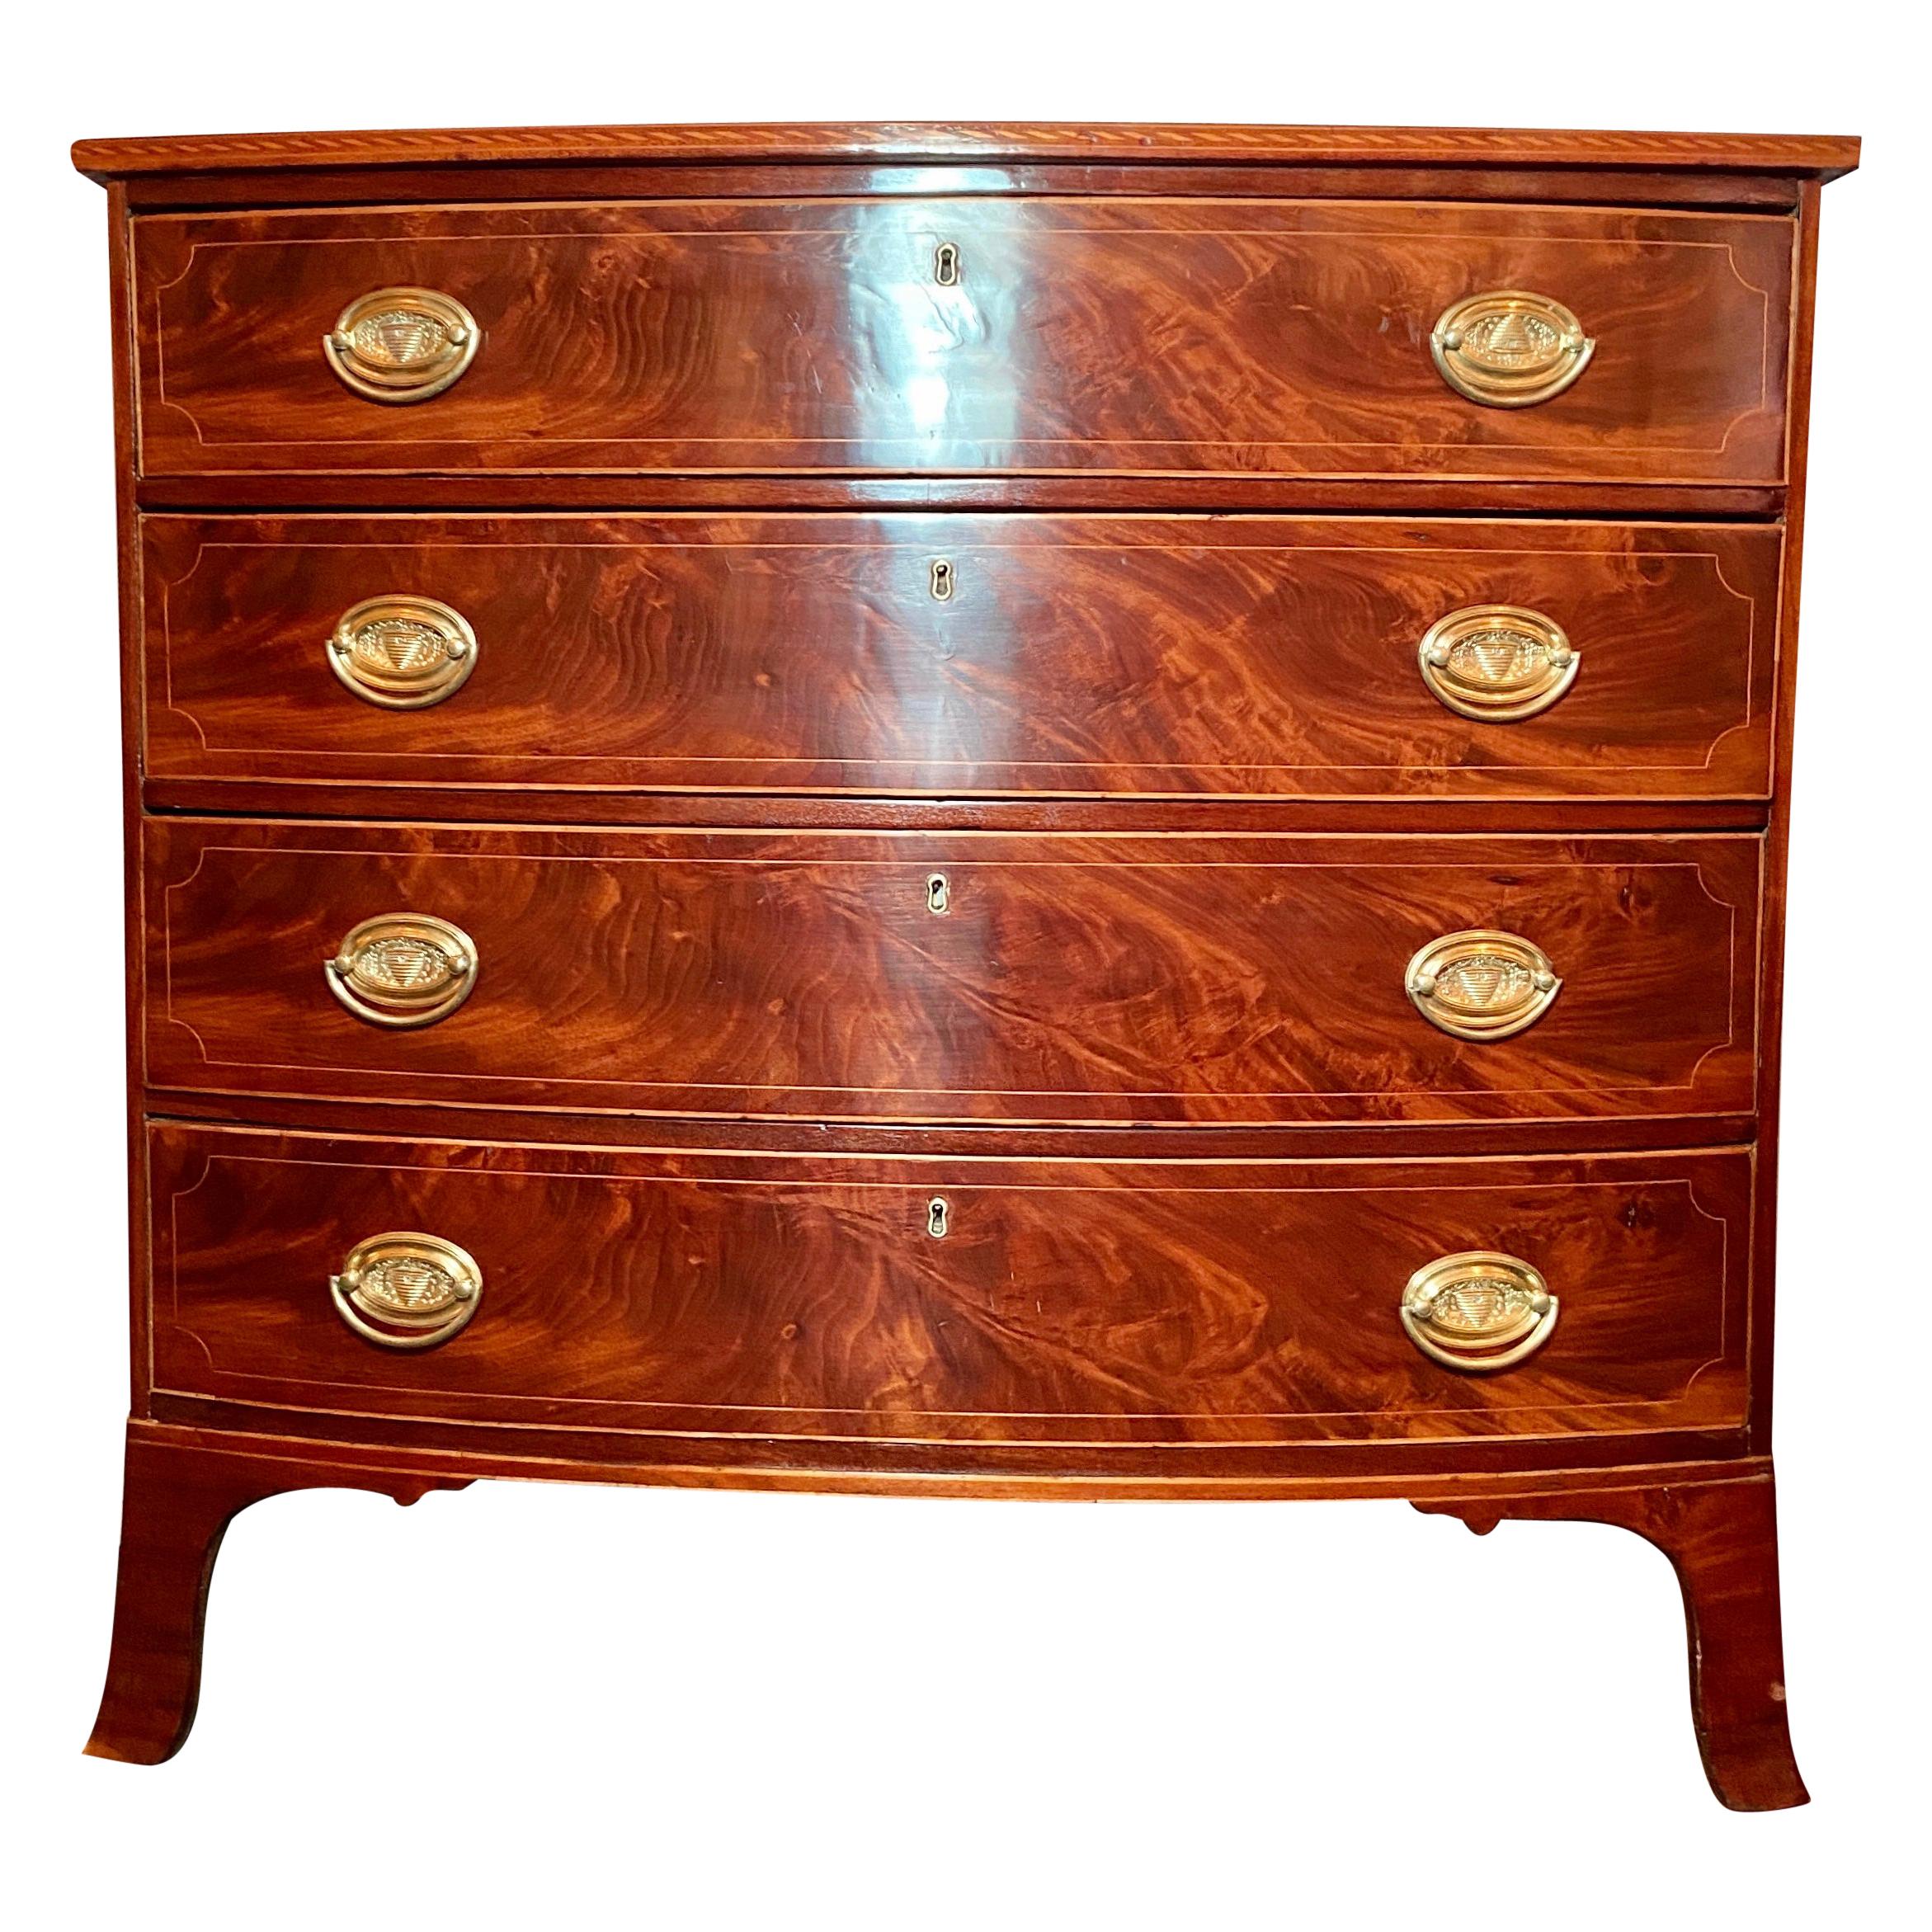 Antique English Sheraton Period Bow-Front Chest of Drawers, circa 1810-1820 For Sale